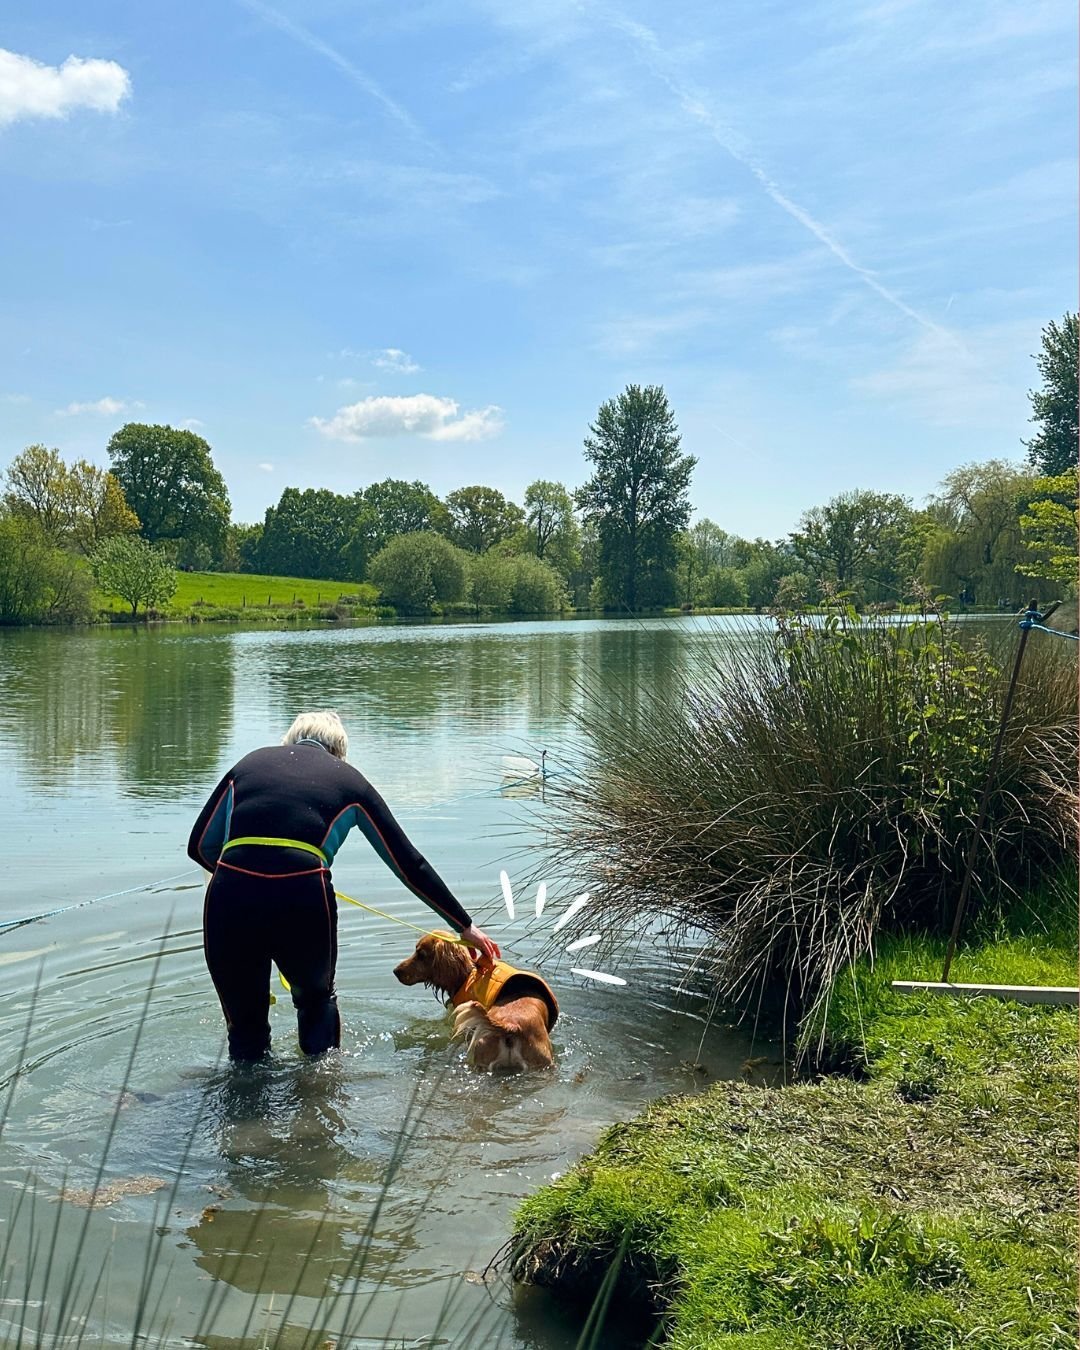 Sue Lloyd from Snazzy Swimmers is ready to be up to her waist in pond water this weekend, to let your dog have the swim of his or her life🌊

Our lake is out of bounds to other dogs, but book in with Sue and she will put a safety jacket on your dog a